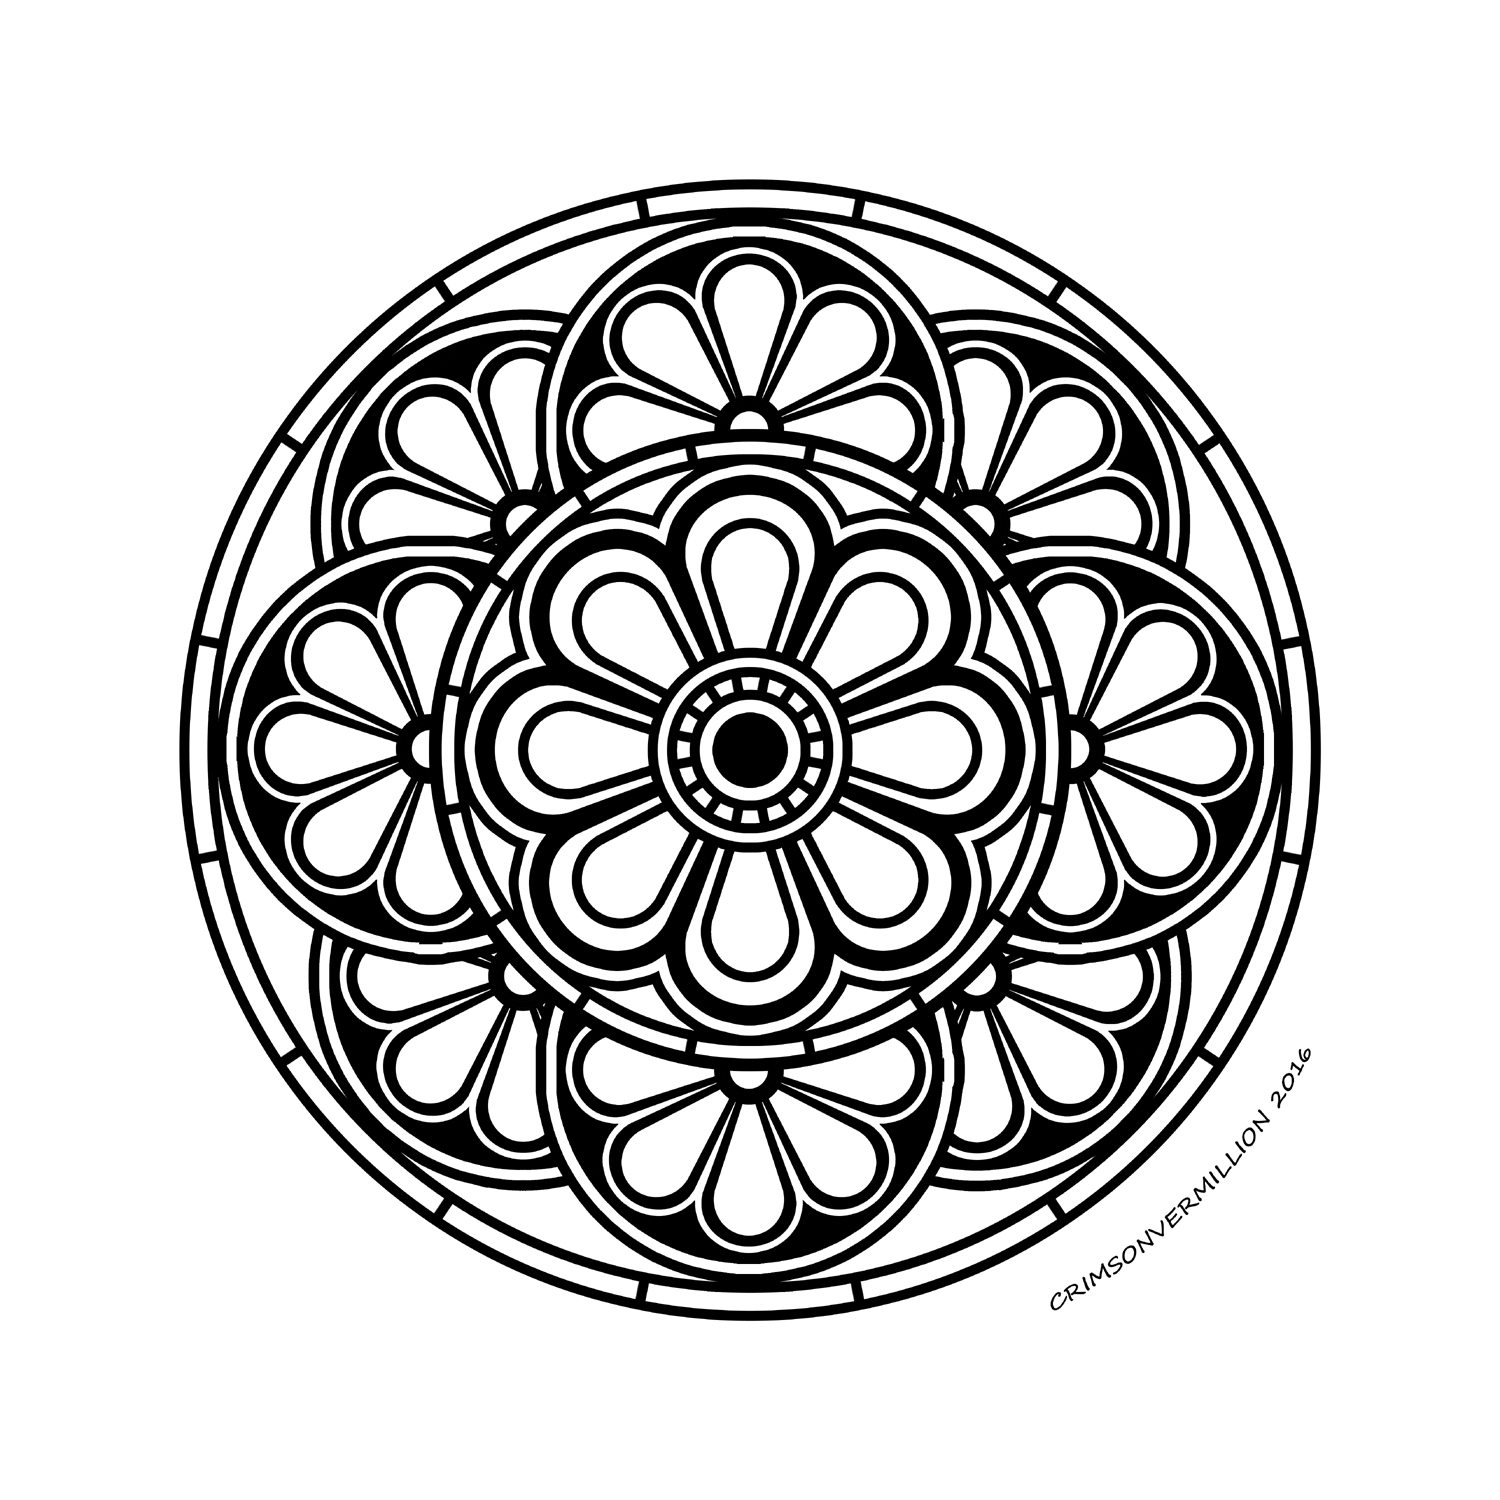 With all his rounded, this mandala is absolutely transcendent!, Artist : Crimson Vermillion